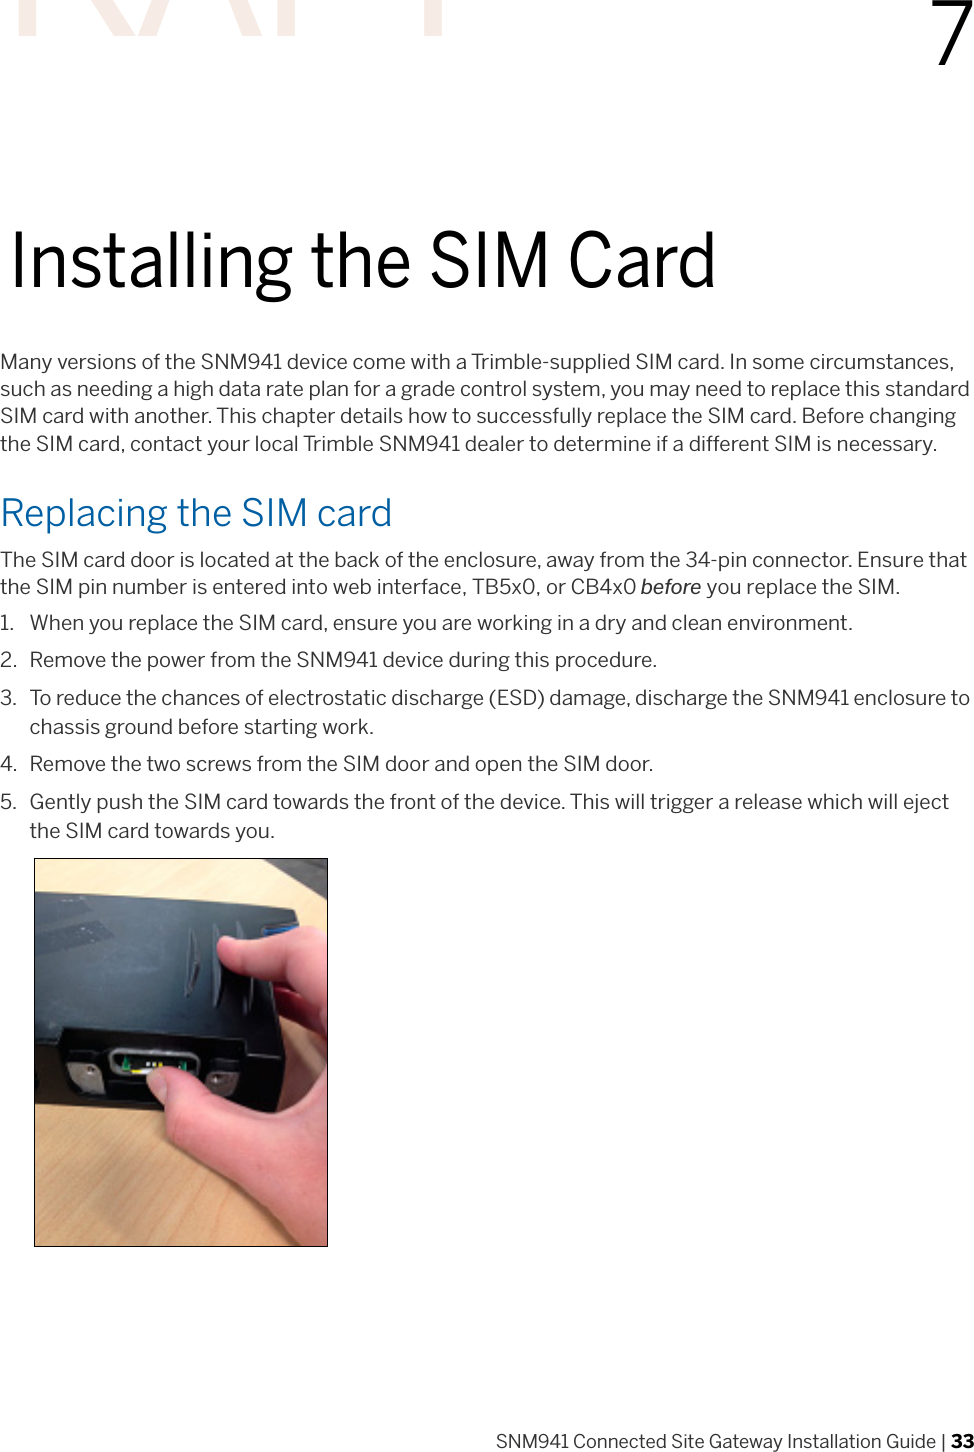 SNM941 Connected Site Gateway Installation Guide | 3377Installing the SIM CardMany versions of the SNM941 device come with a Trimble-supplied SIM card. In some circumstances, such as needing a high data rate plan for a grade control system, you may need to replace this standard SIM card with another. This chapter details how to successfully replace the SIM card. Before changing the SIM card, contact your local Trimble SNM941 dealer to determine if a different SIM is necessary. Replacing the SIM cardThe SIM card door is located at the back of the enclosure, away from the 34-pin connector. Ensure that the SIM pin number is entered into web interface, TB5x0, or CB4x0 before you replace the SIM.1. When you replace the SIM card, ensure you are working in a dry and clean environment. 2. Remove the power from the SNM941 device during this procedure. 3. To reduce the chances of electrostatic discharge (ESD) damage, discharge the SNM941 enclosure to chassis ground before starting work. 4. Remove the two screws from the SIM door and open the SIM door. 5. Gently push the SIM card towards the front of the device. This will trigger a release which will eject the SIM card towards you.DRAFT